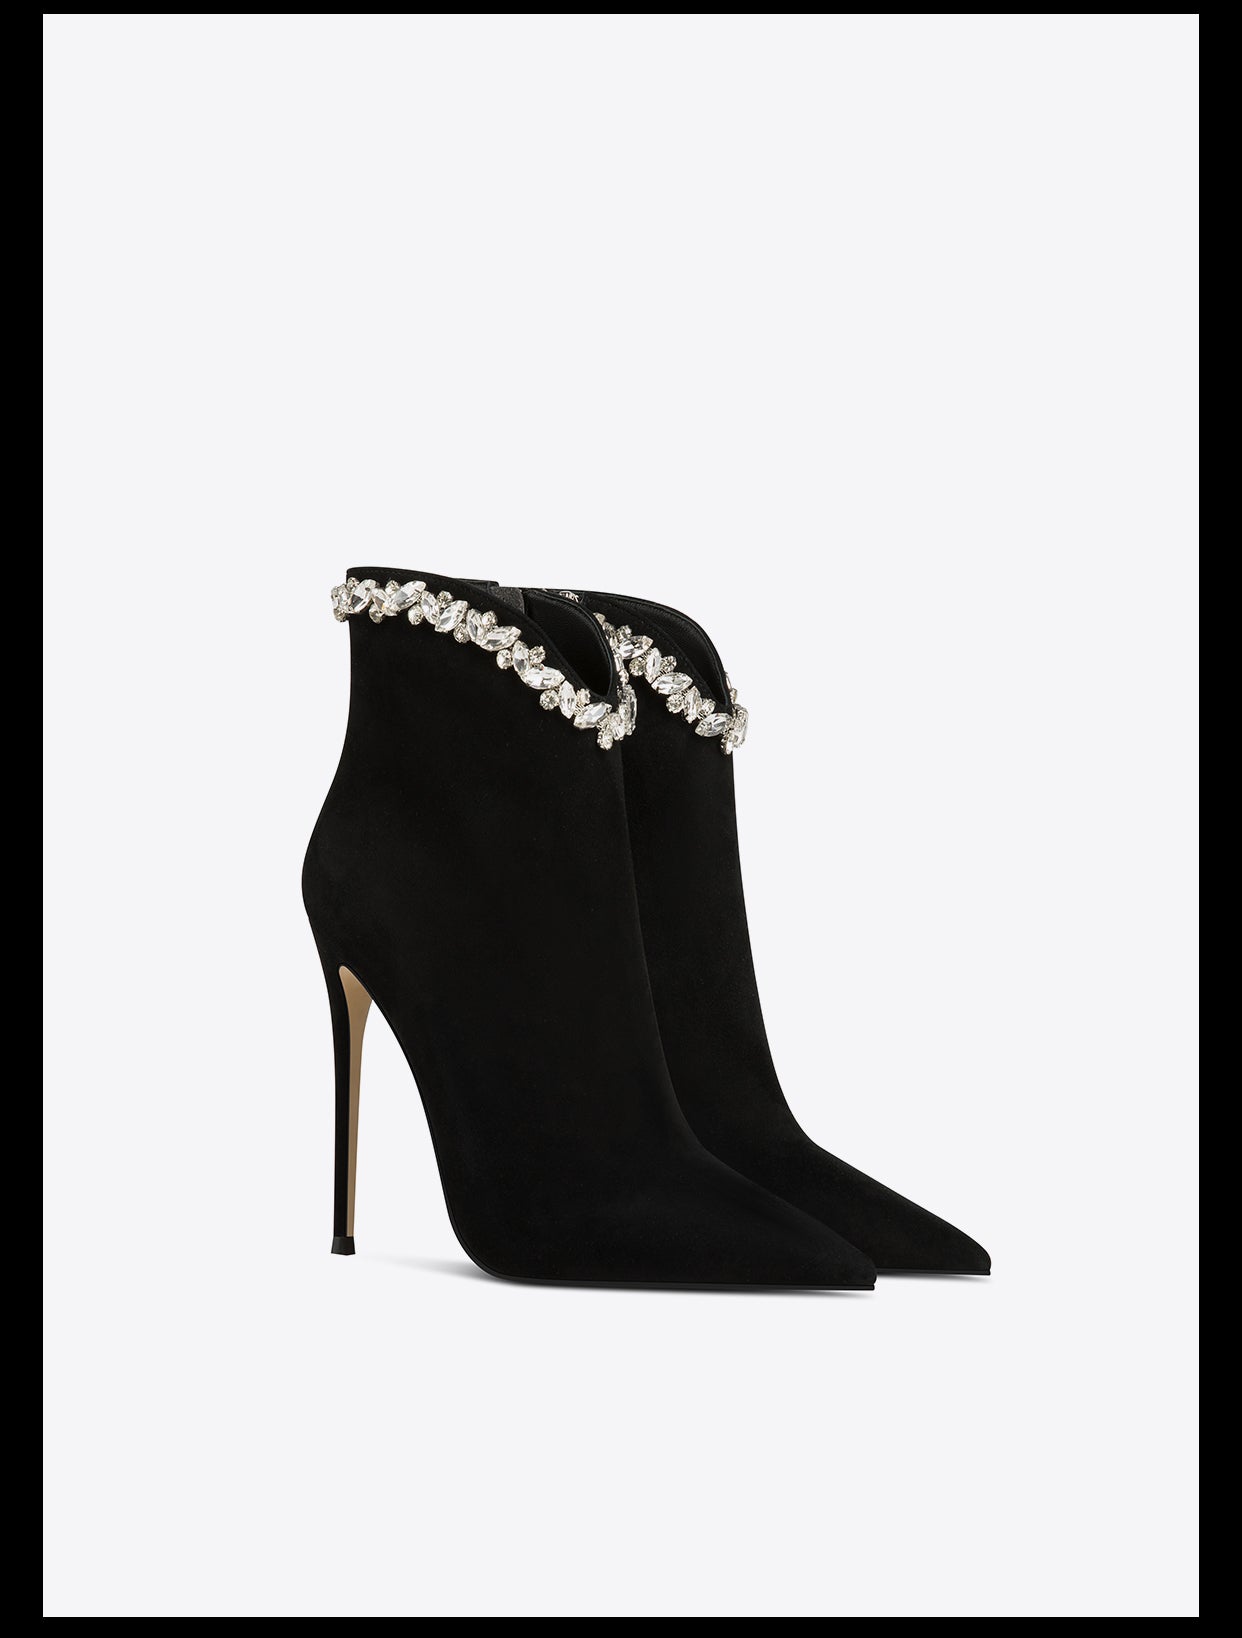 Fabfei black suede pointed toe high-heeled autumn/winter stiletto boots